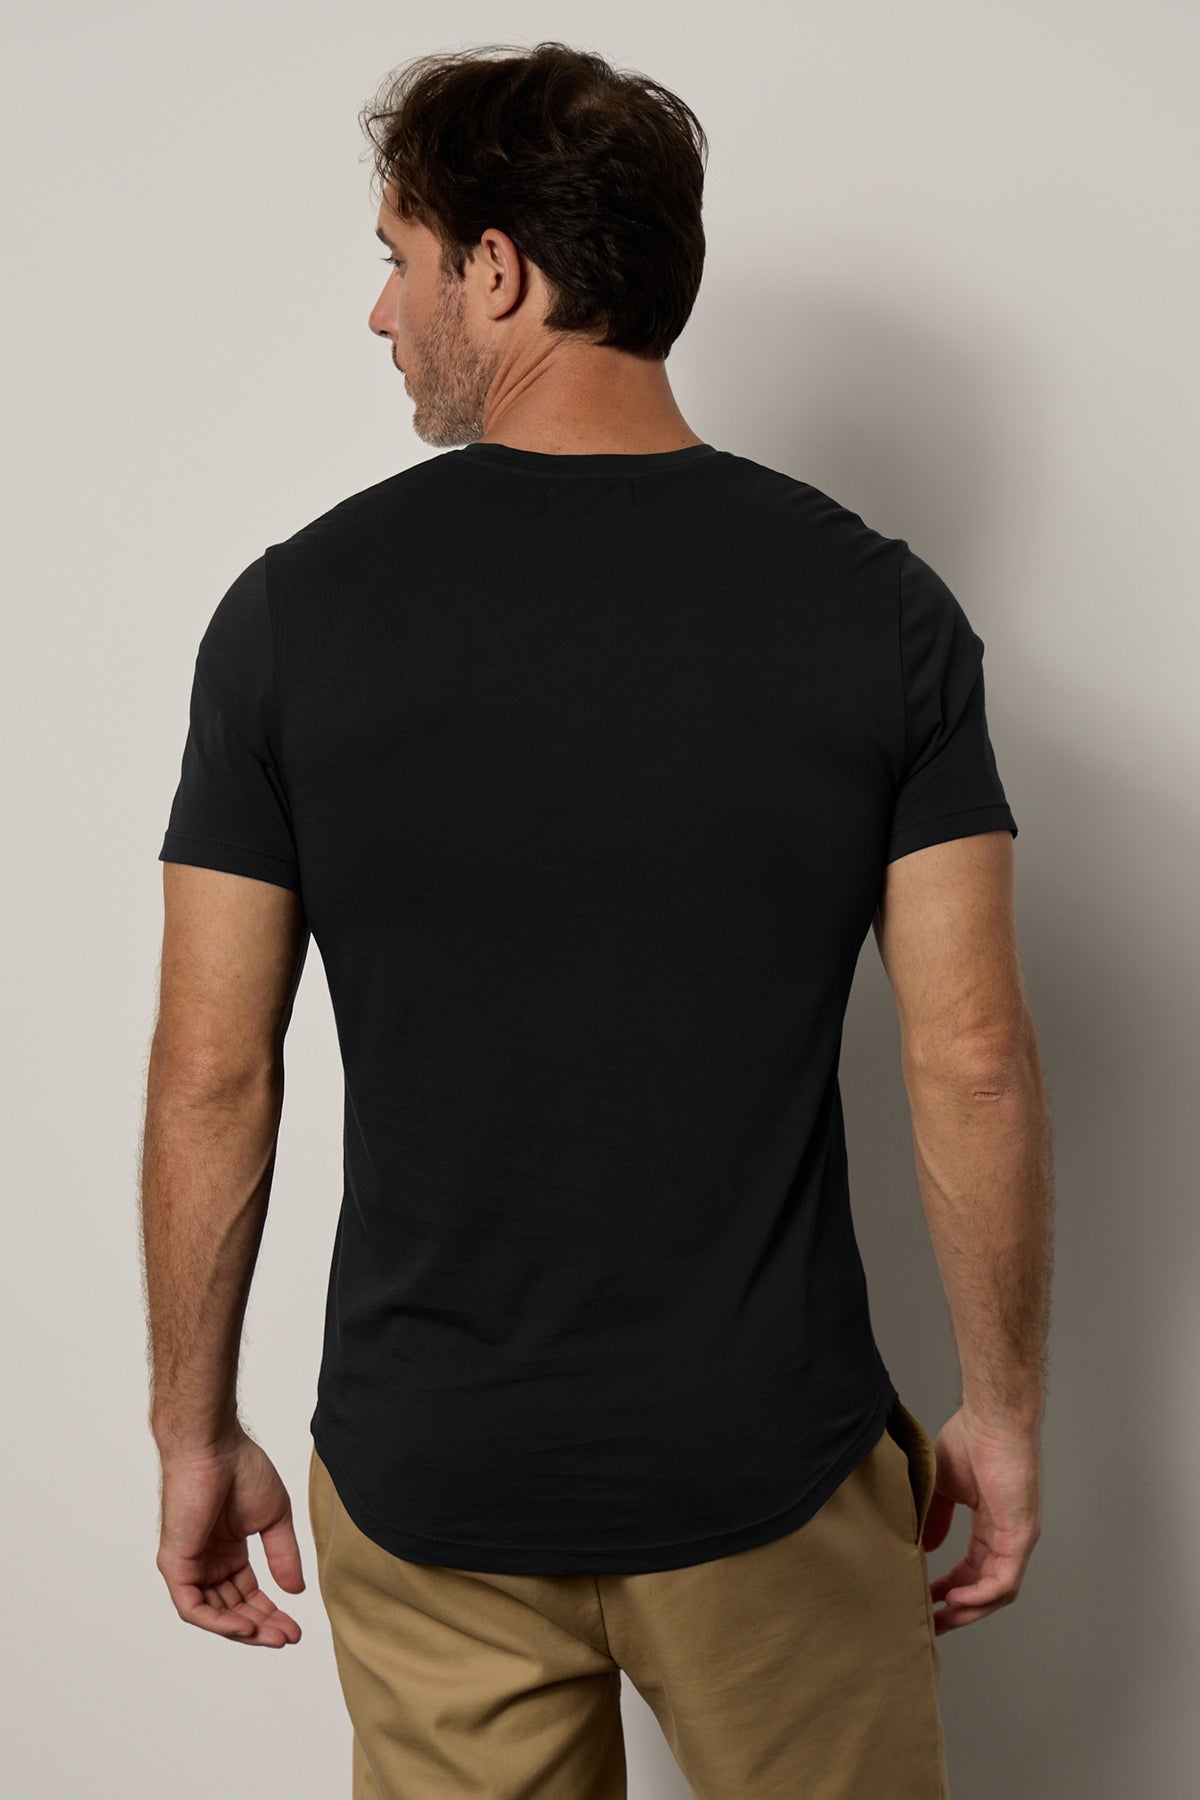 Fulton Short Sleeve Henley in black with Aiden pant in khaki back-25943764271297